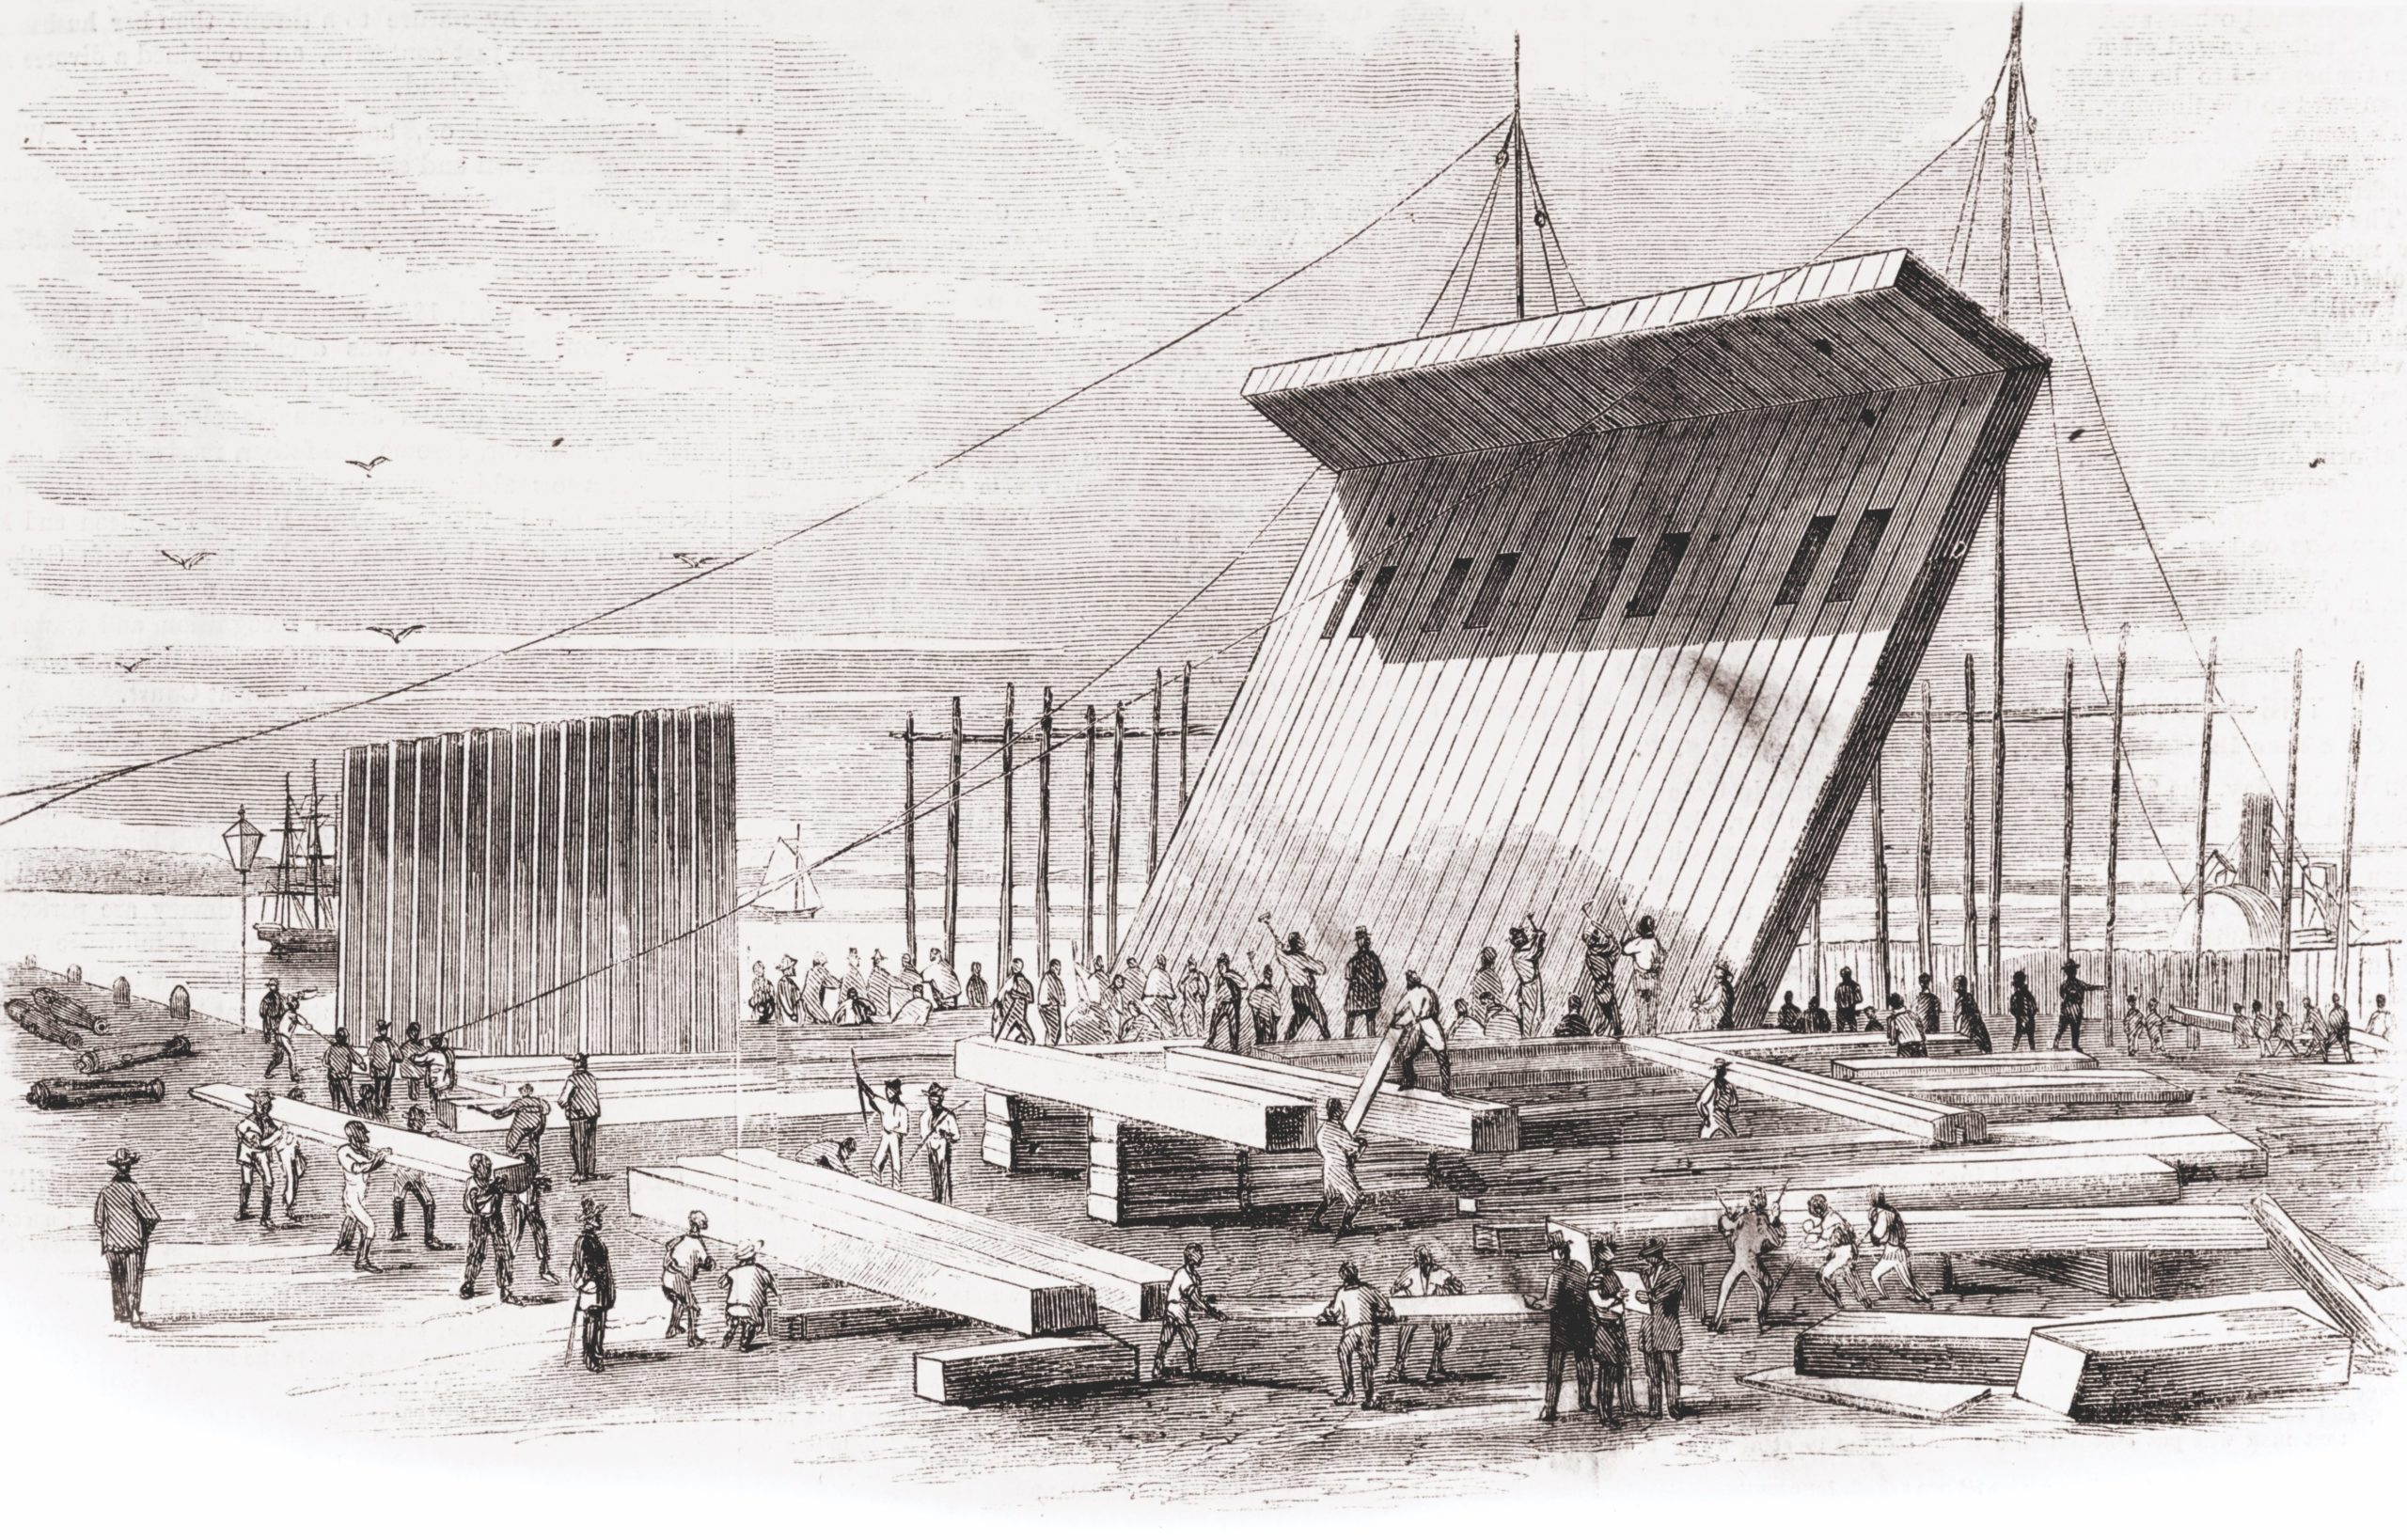 The substantial reliance on slave labor in the construction of the Floating Battery, commented on by Fort Sumterâ€™s Major Robert Anderson, is seen in this Frank Leslieâ€™s Illustrated Newspaper drawing. The group effort at Marshâ€™s Shipyard proved productive. Construction was completed in a few weeks. (Naval History and Heritage Command)